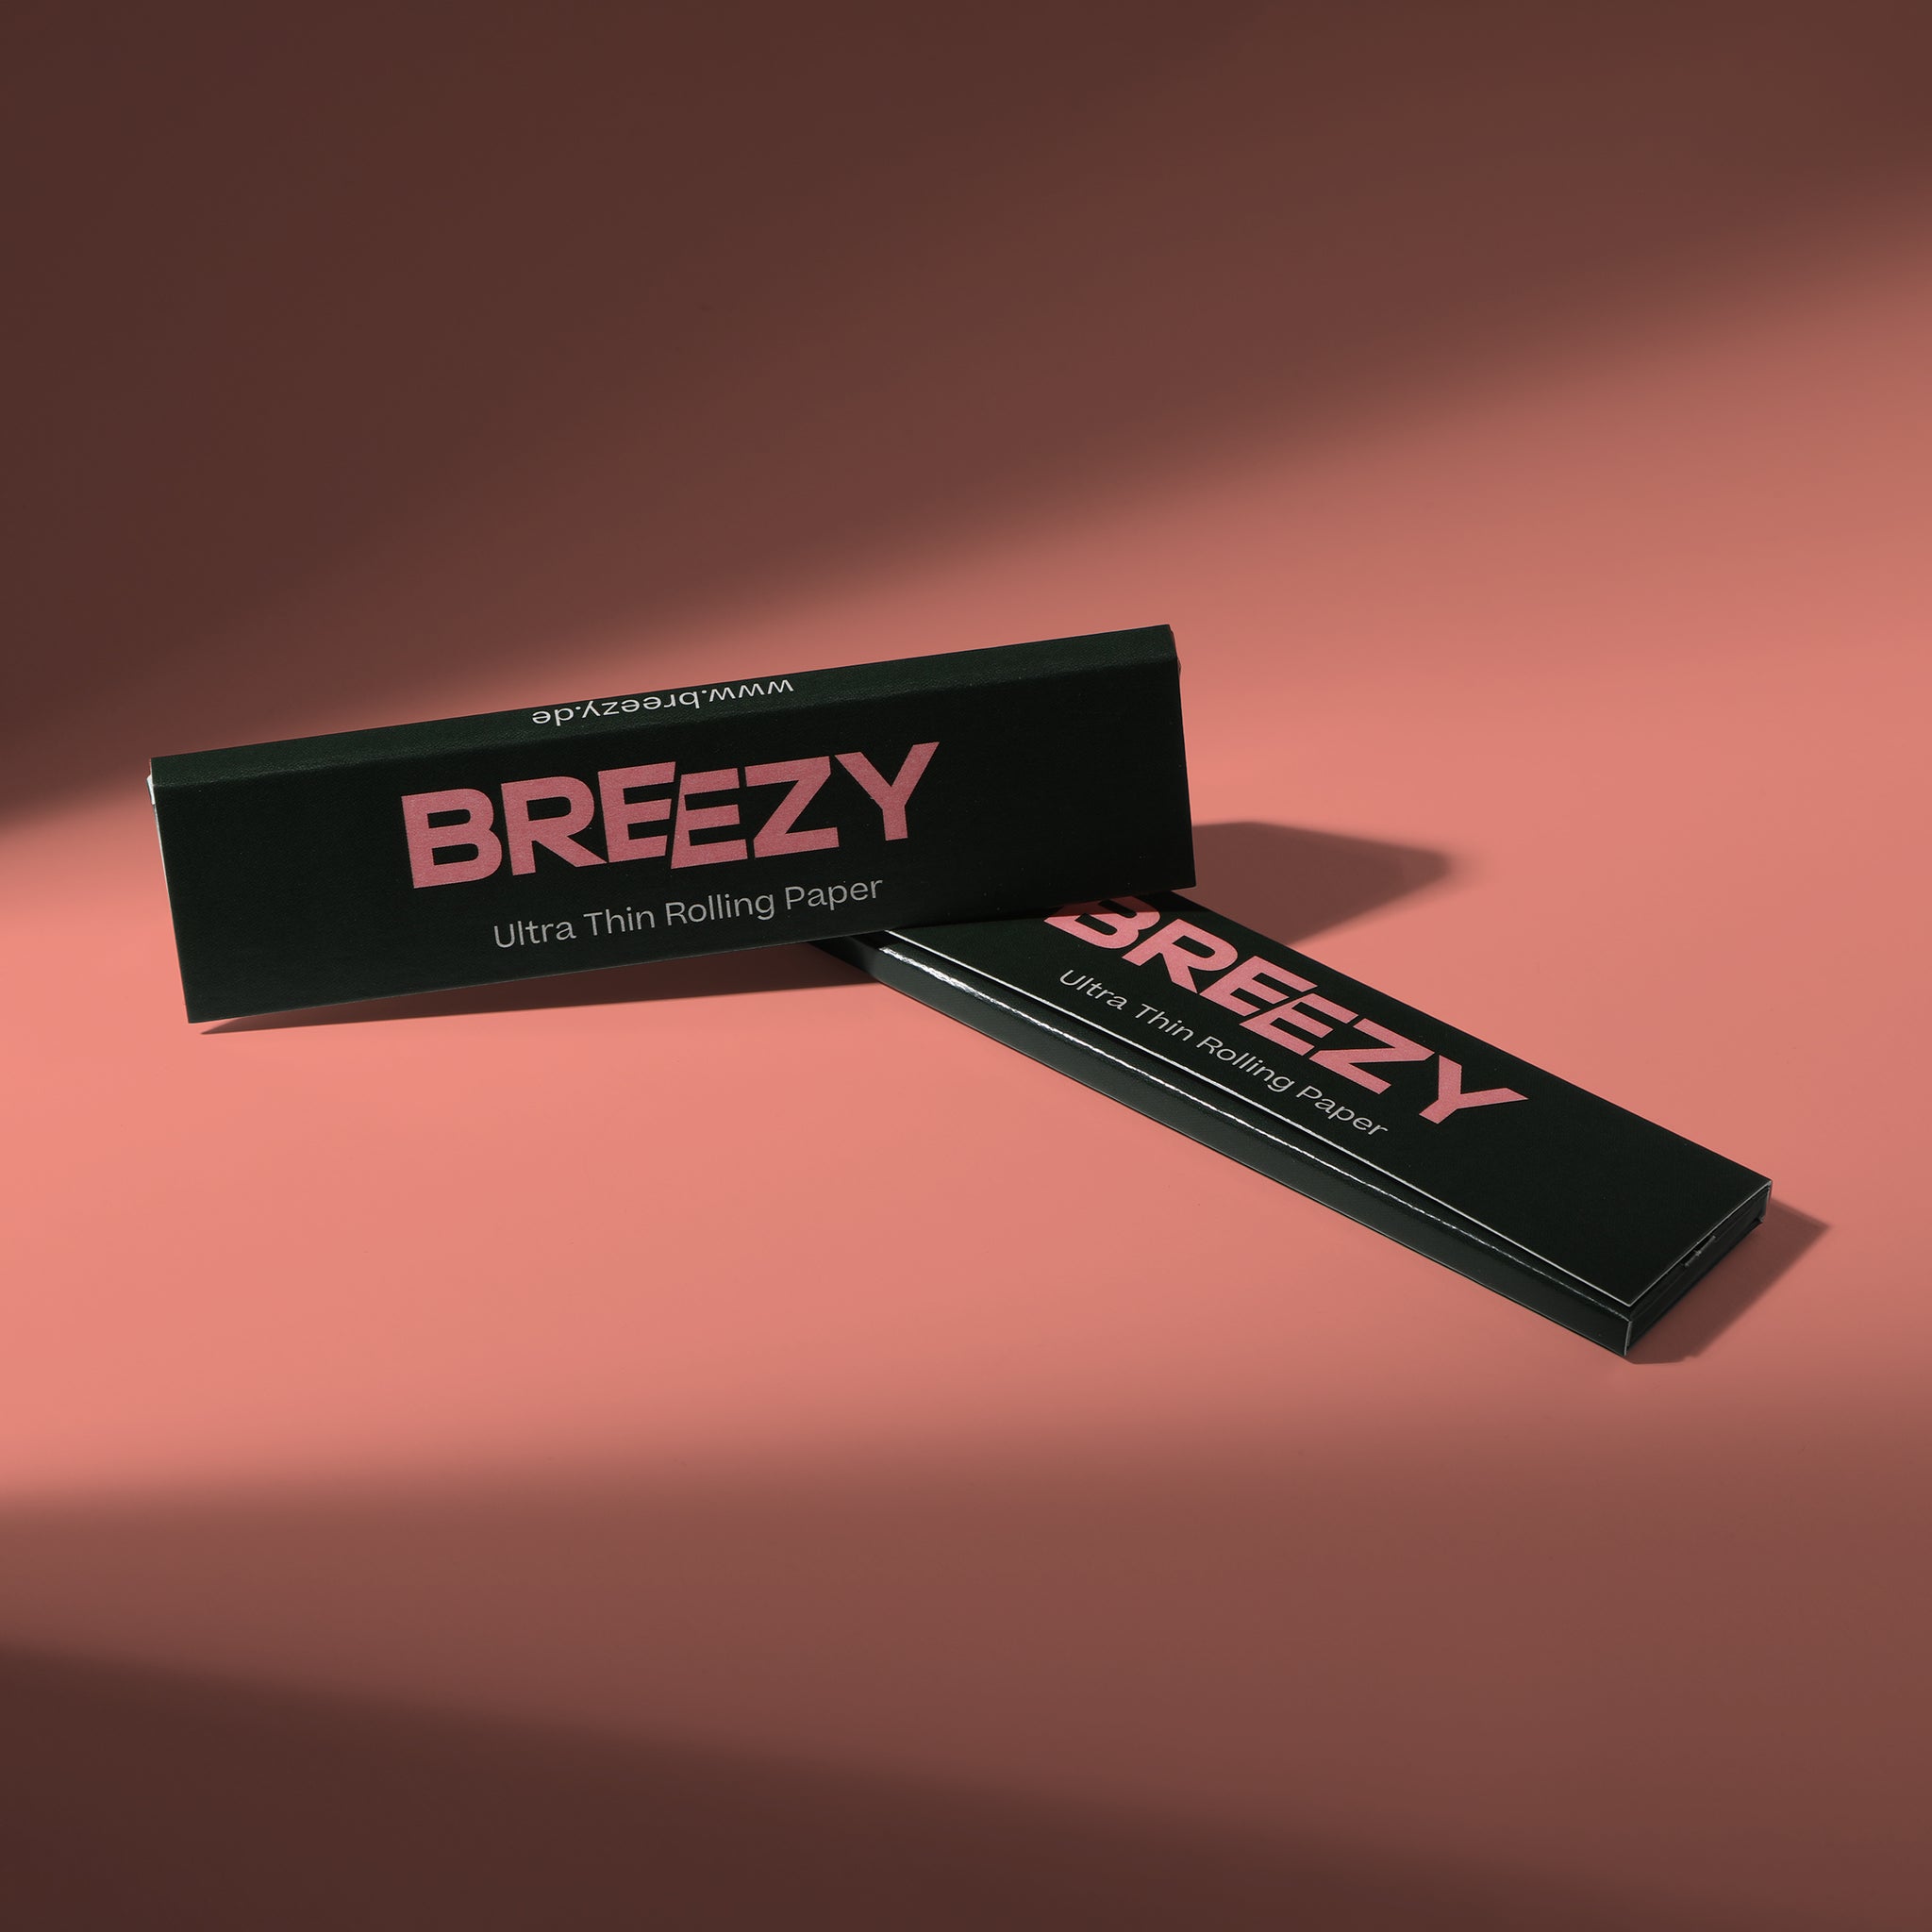 BREEZY KING SIZE SLIM PAPERS